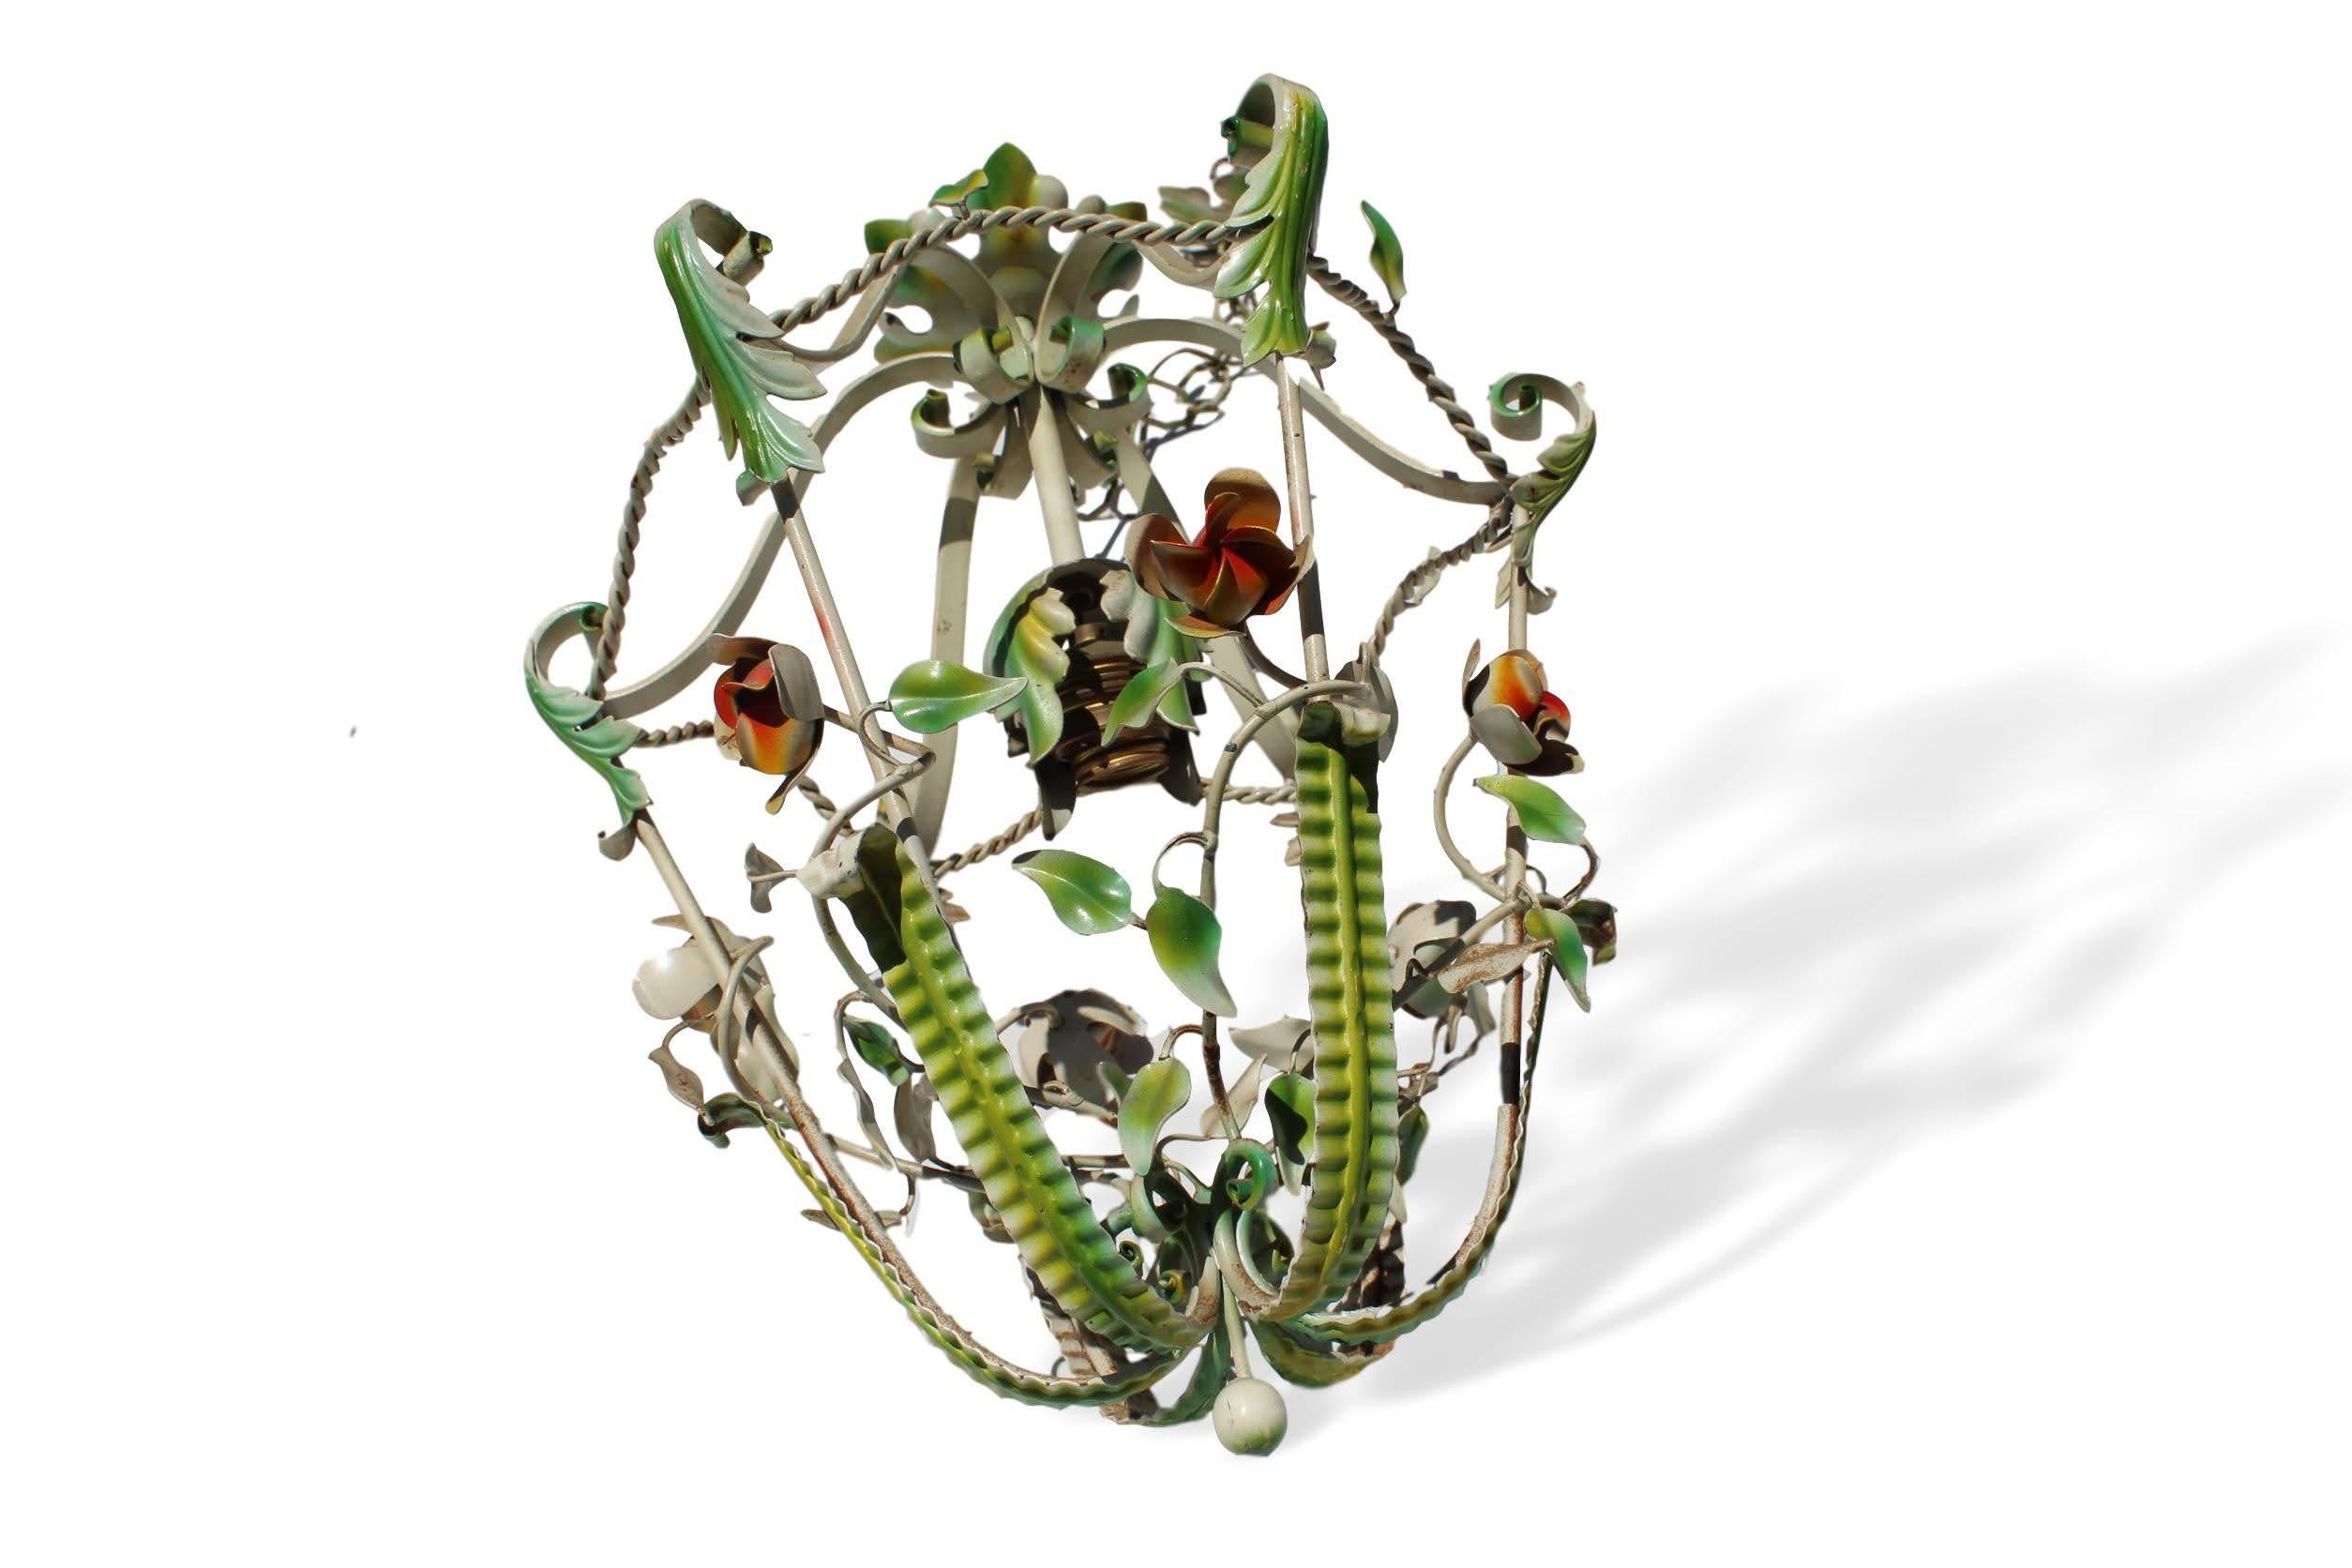 Pair of midcentury painted wrought iron hanging lantern light fixtures, Italian, each fitted with a central light, framed by vining flowers and foliates.
Measures: 15.75